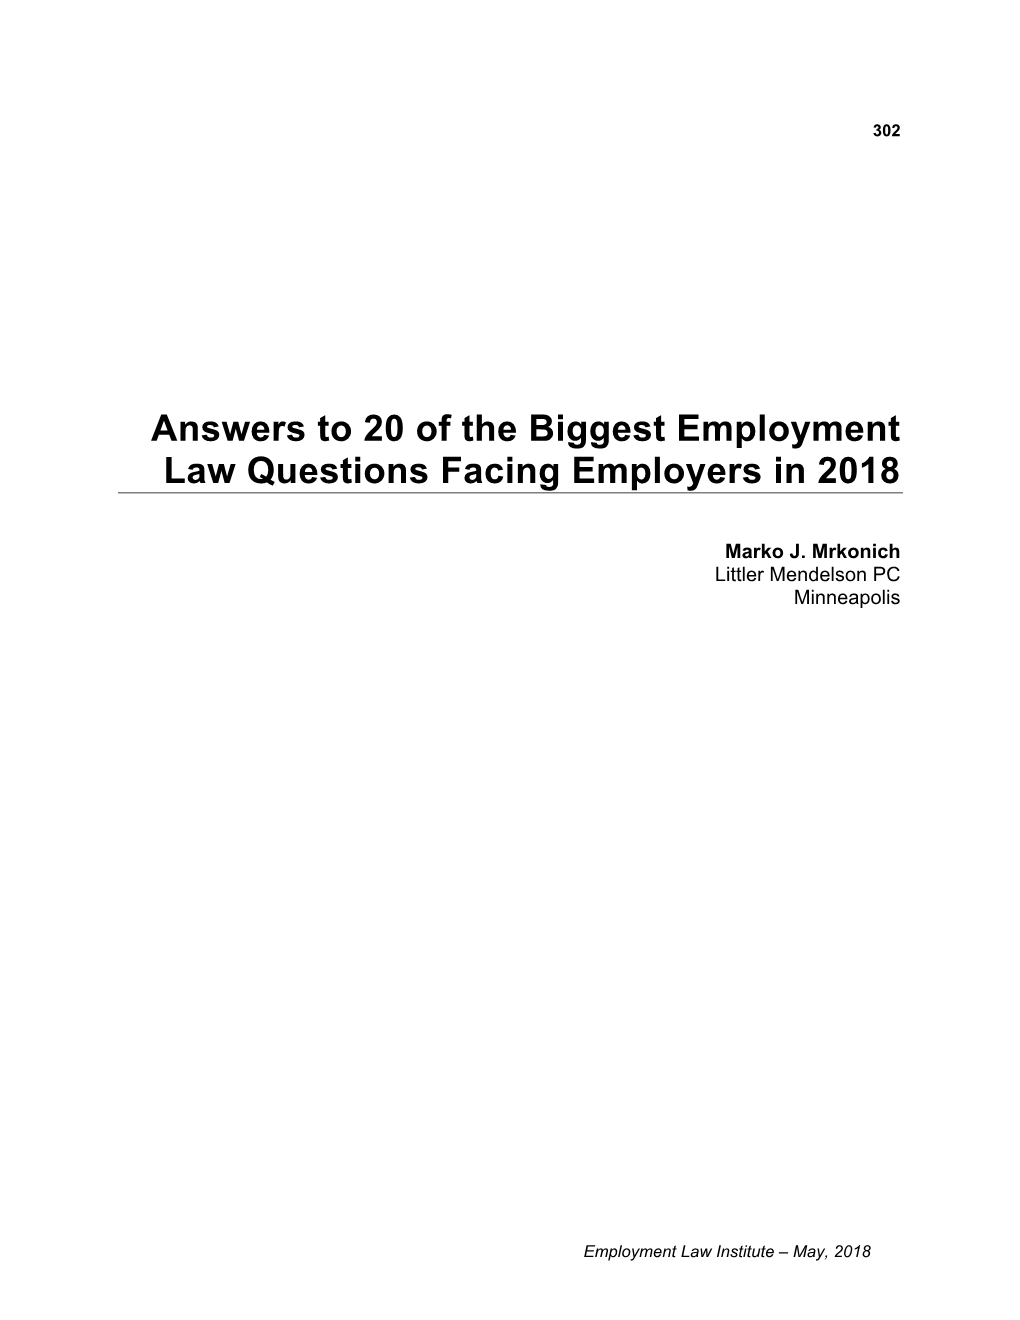 Answers to 20 of the Biggest Employment Law Questions Facing Employers in 2018